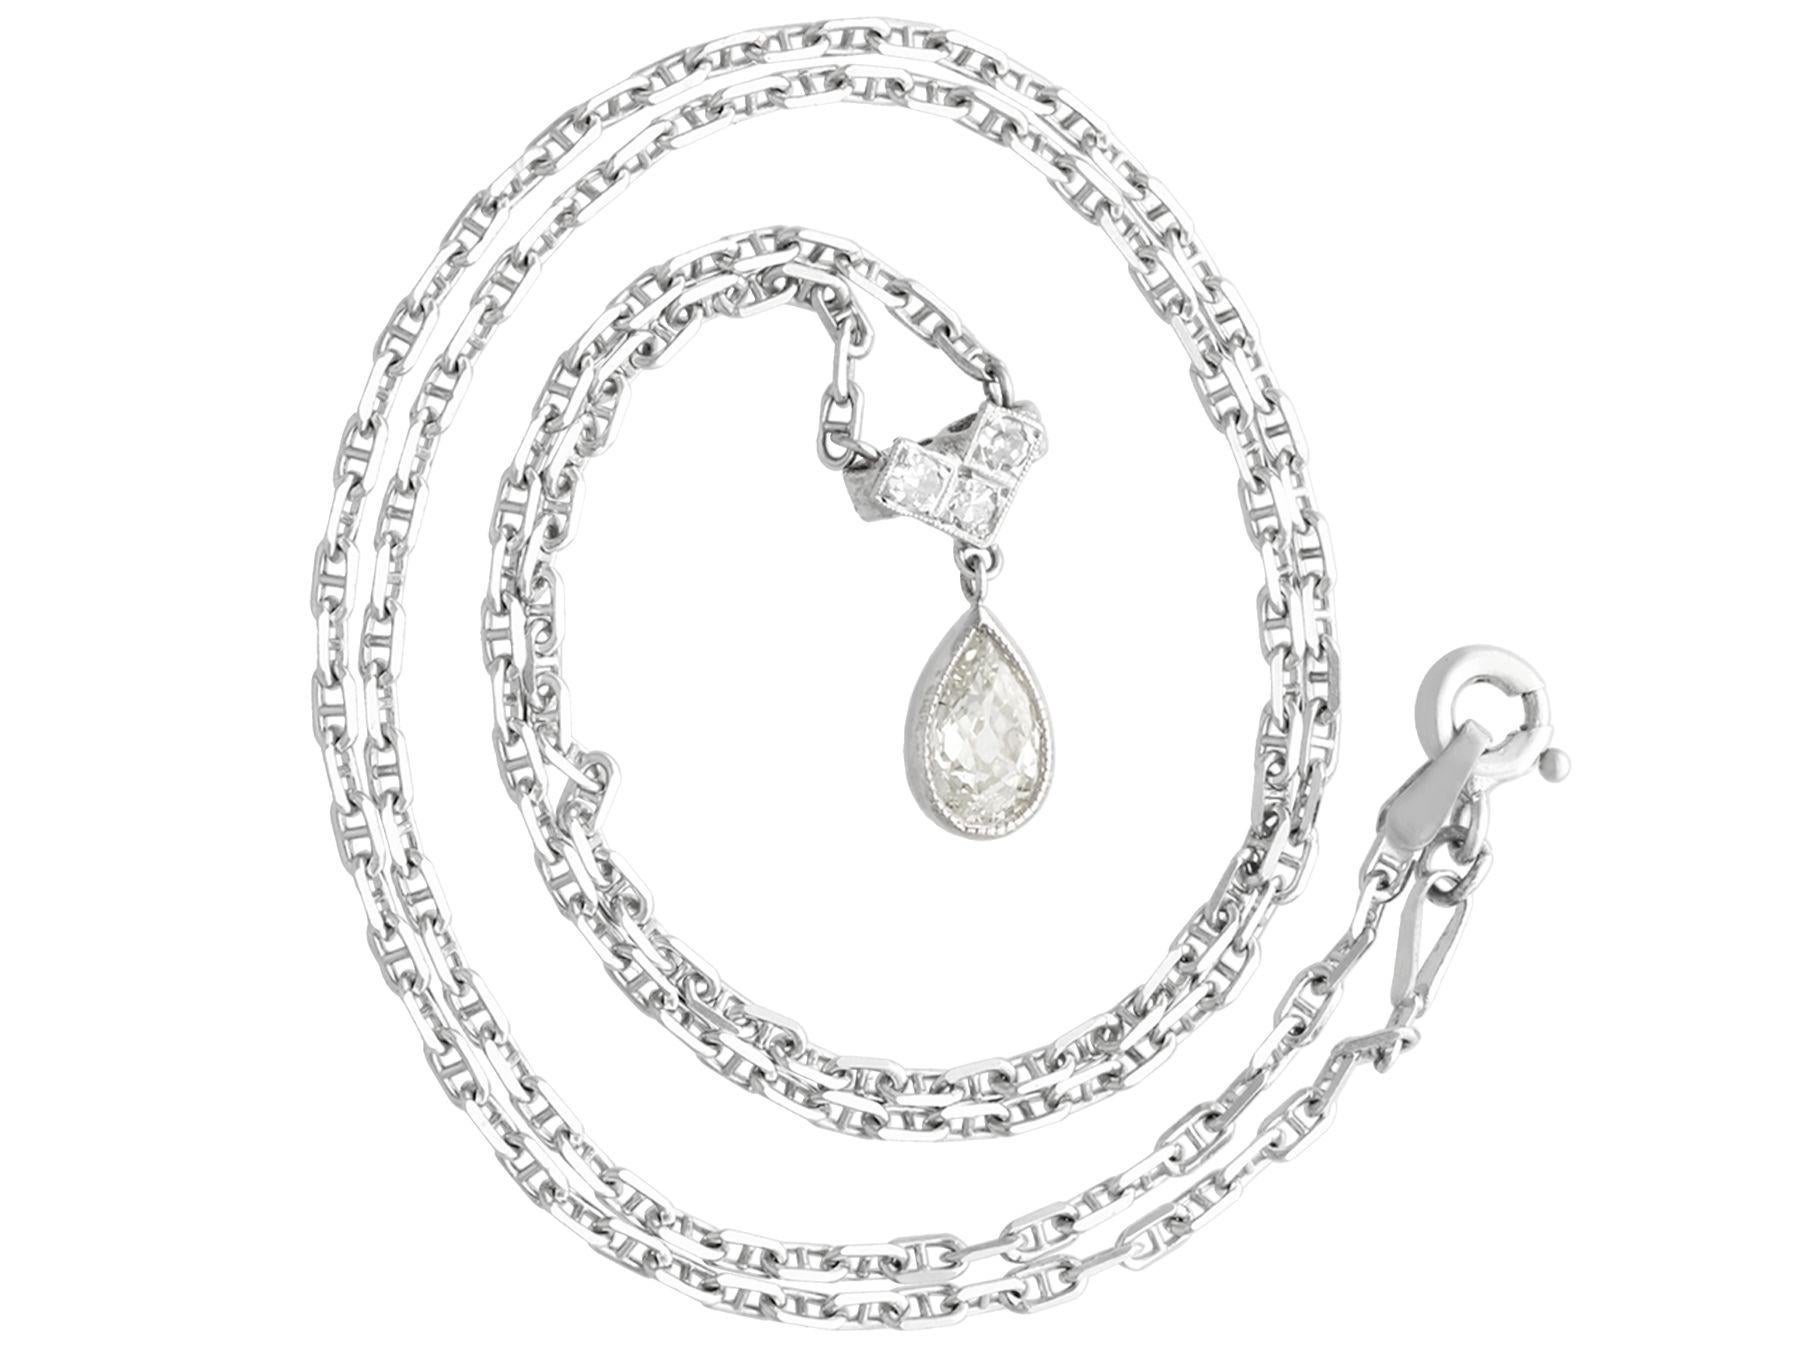 An impressive antique 1930s 0.68 carat diamond and 9 karat white gold necklace; part of our diverse antique jewelry and estate jewelry collections.

This fine and impressive antique pear cut diamond necklace has been crafted in 9k white gold.

The